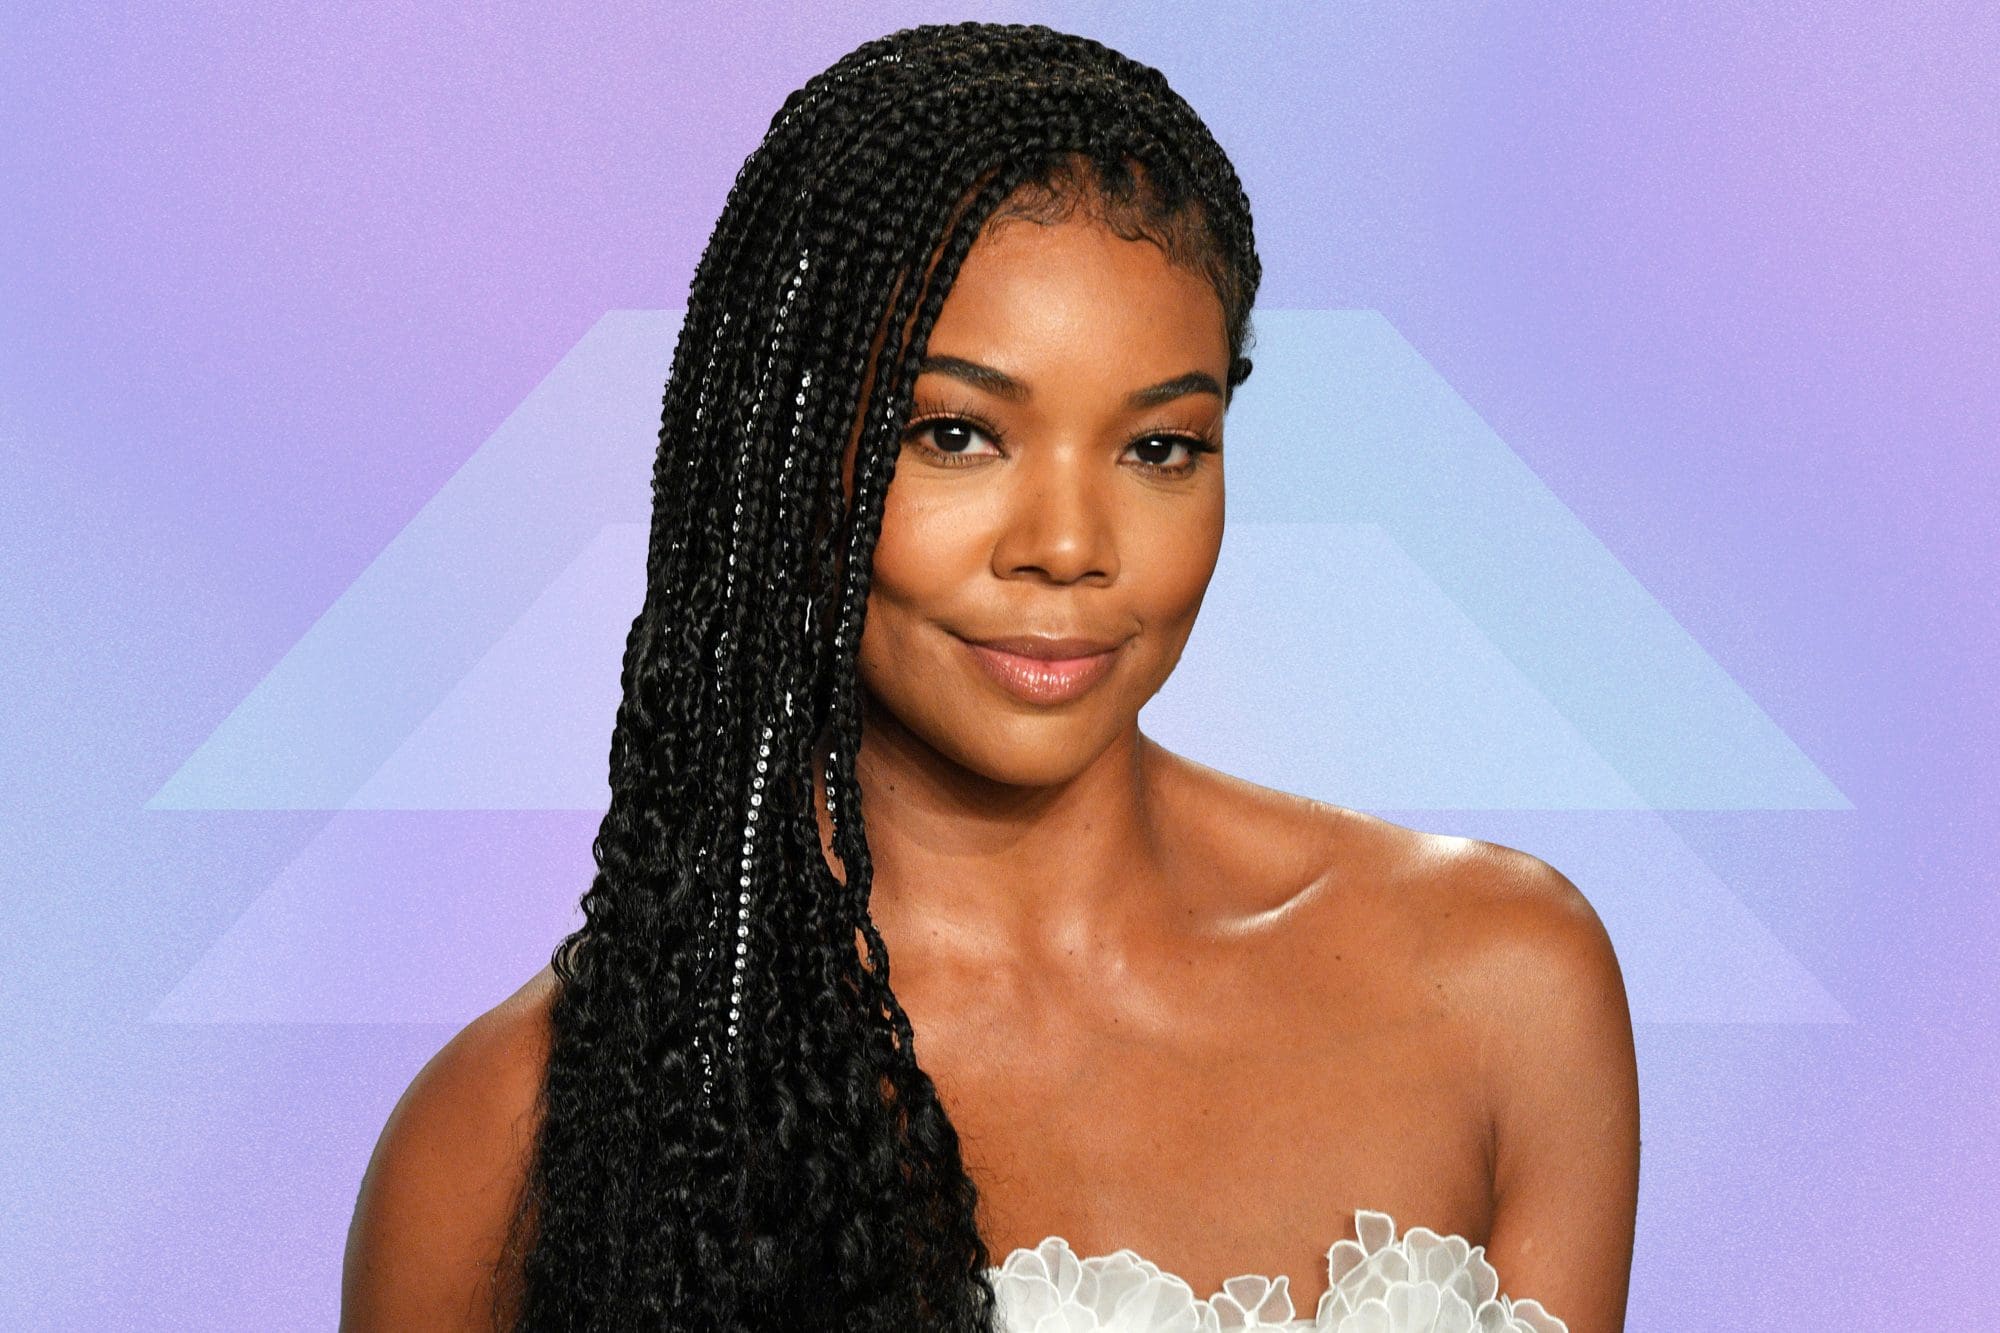 gabrielle-union-celebrates-the-birthday-of-her-mother-and-fans-love-the-pics-and-clips-she-shares-on-social-media